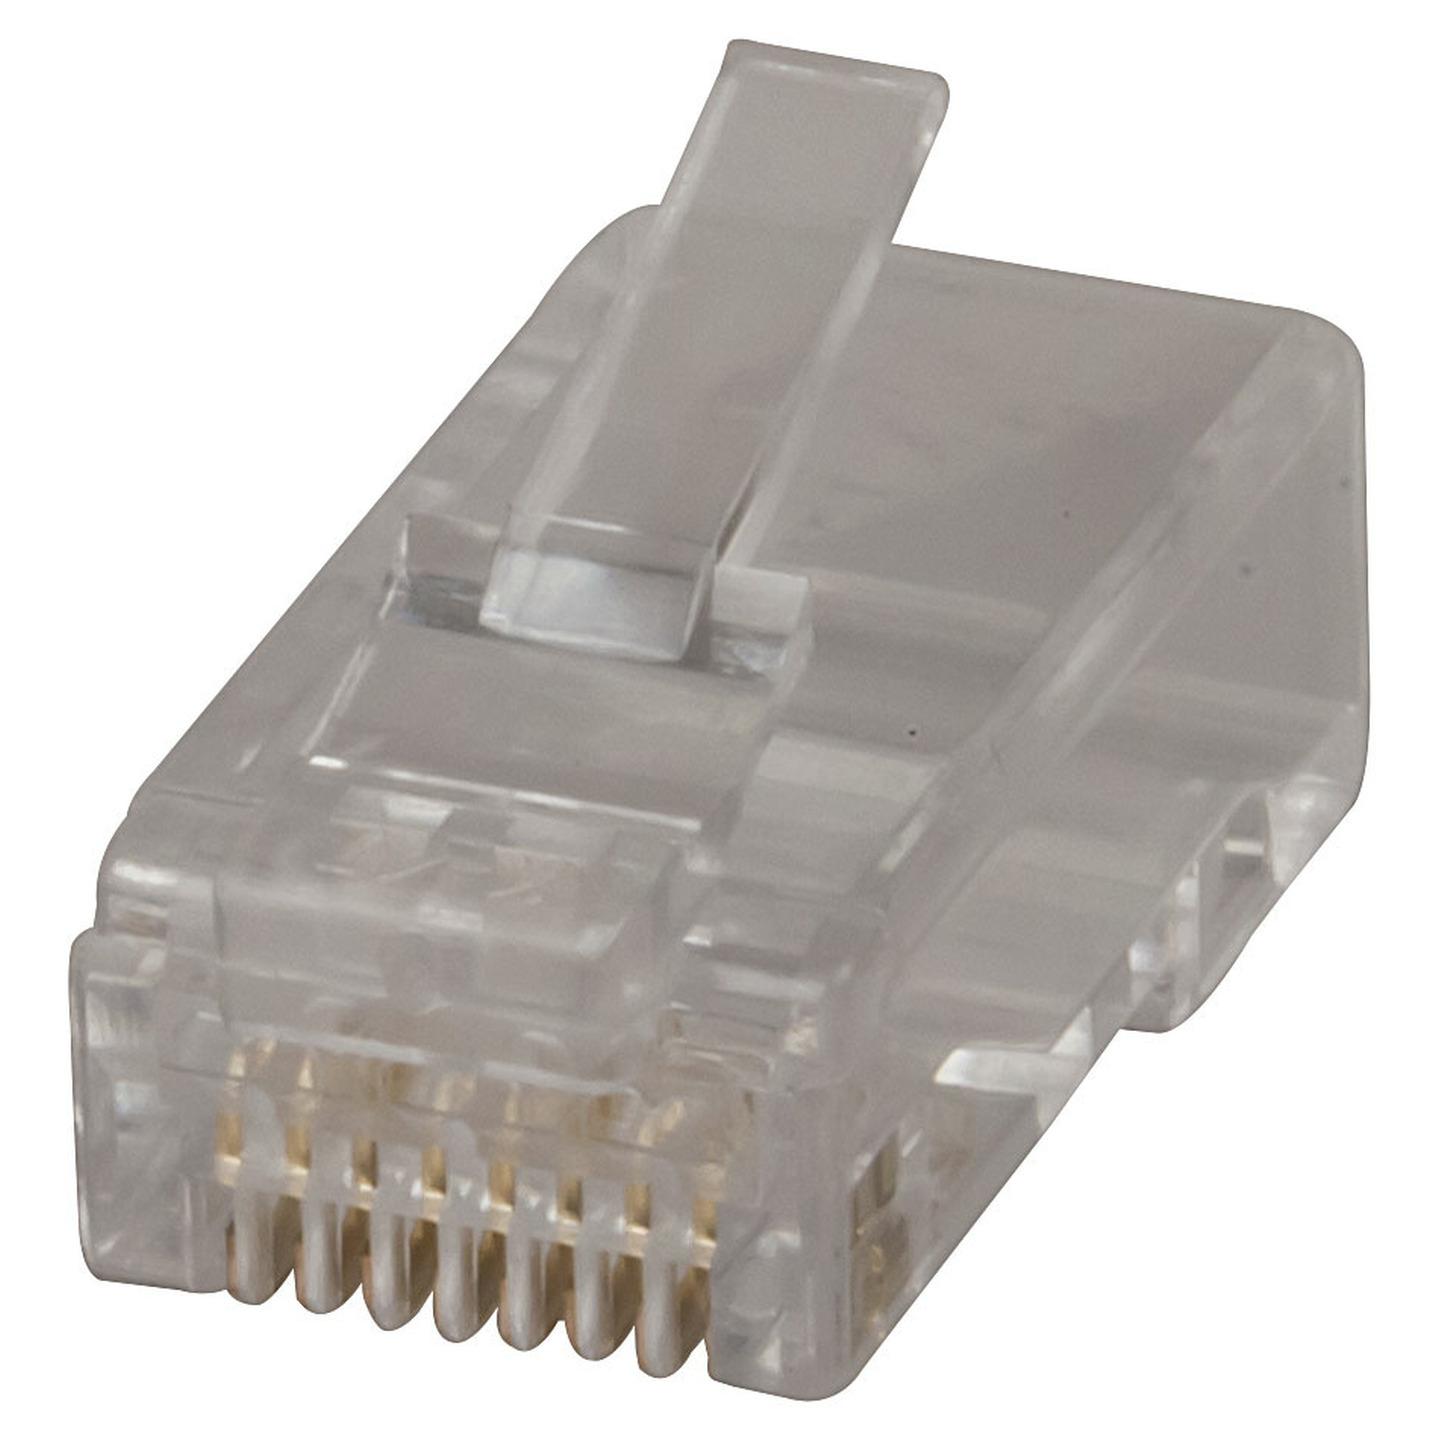 RJ45 Modular Plugs for Stranded and Solid Cat 6 Cable Pack of 10